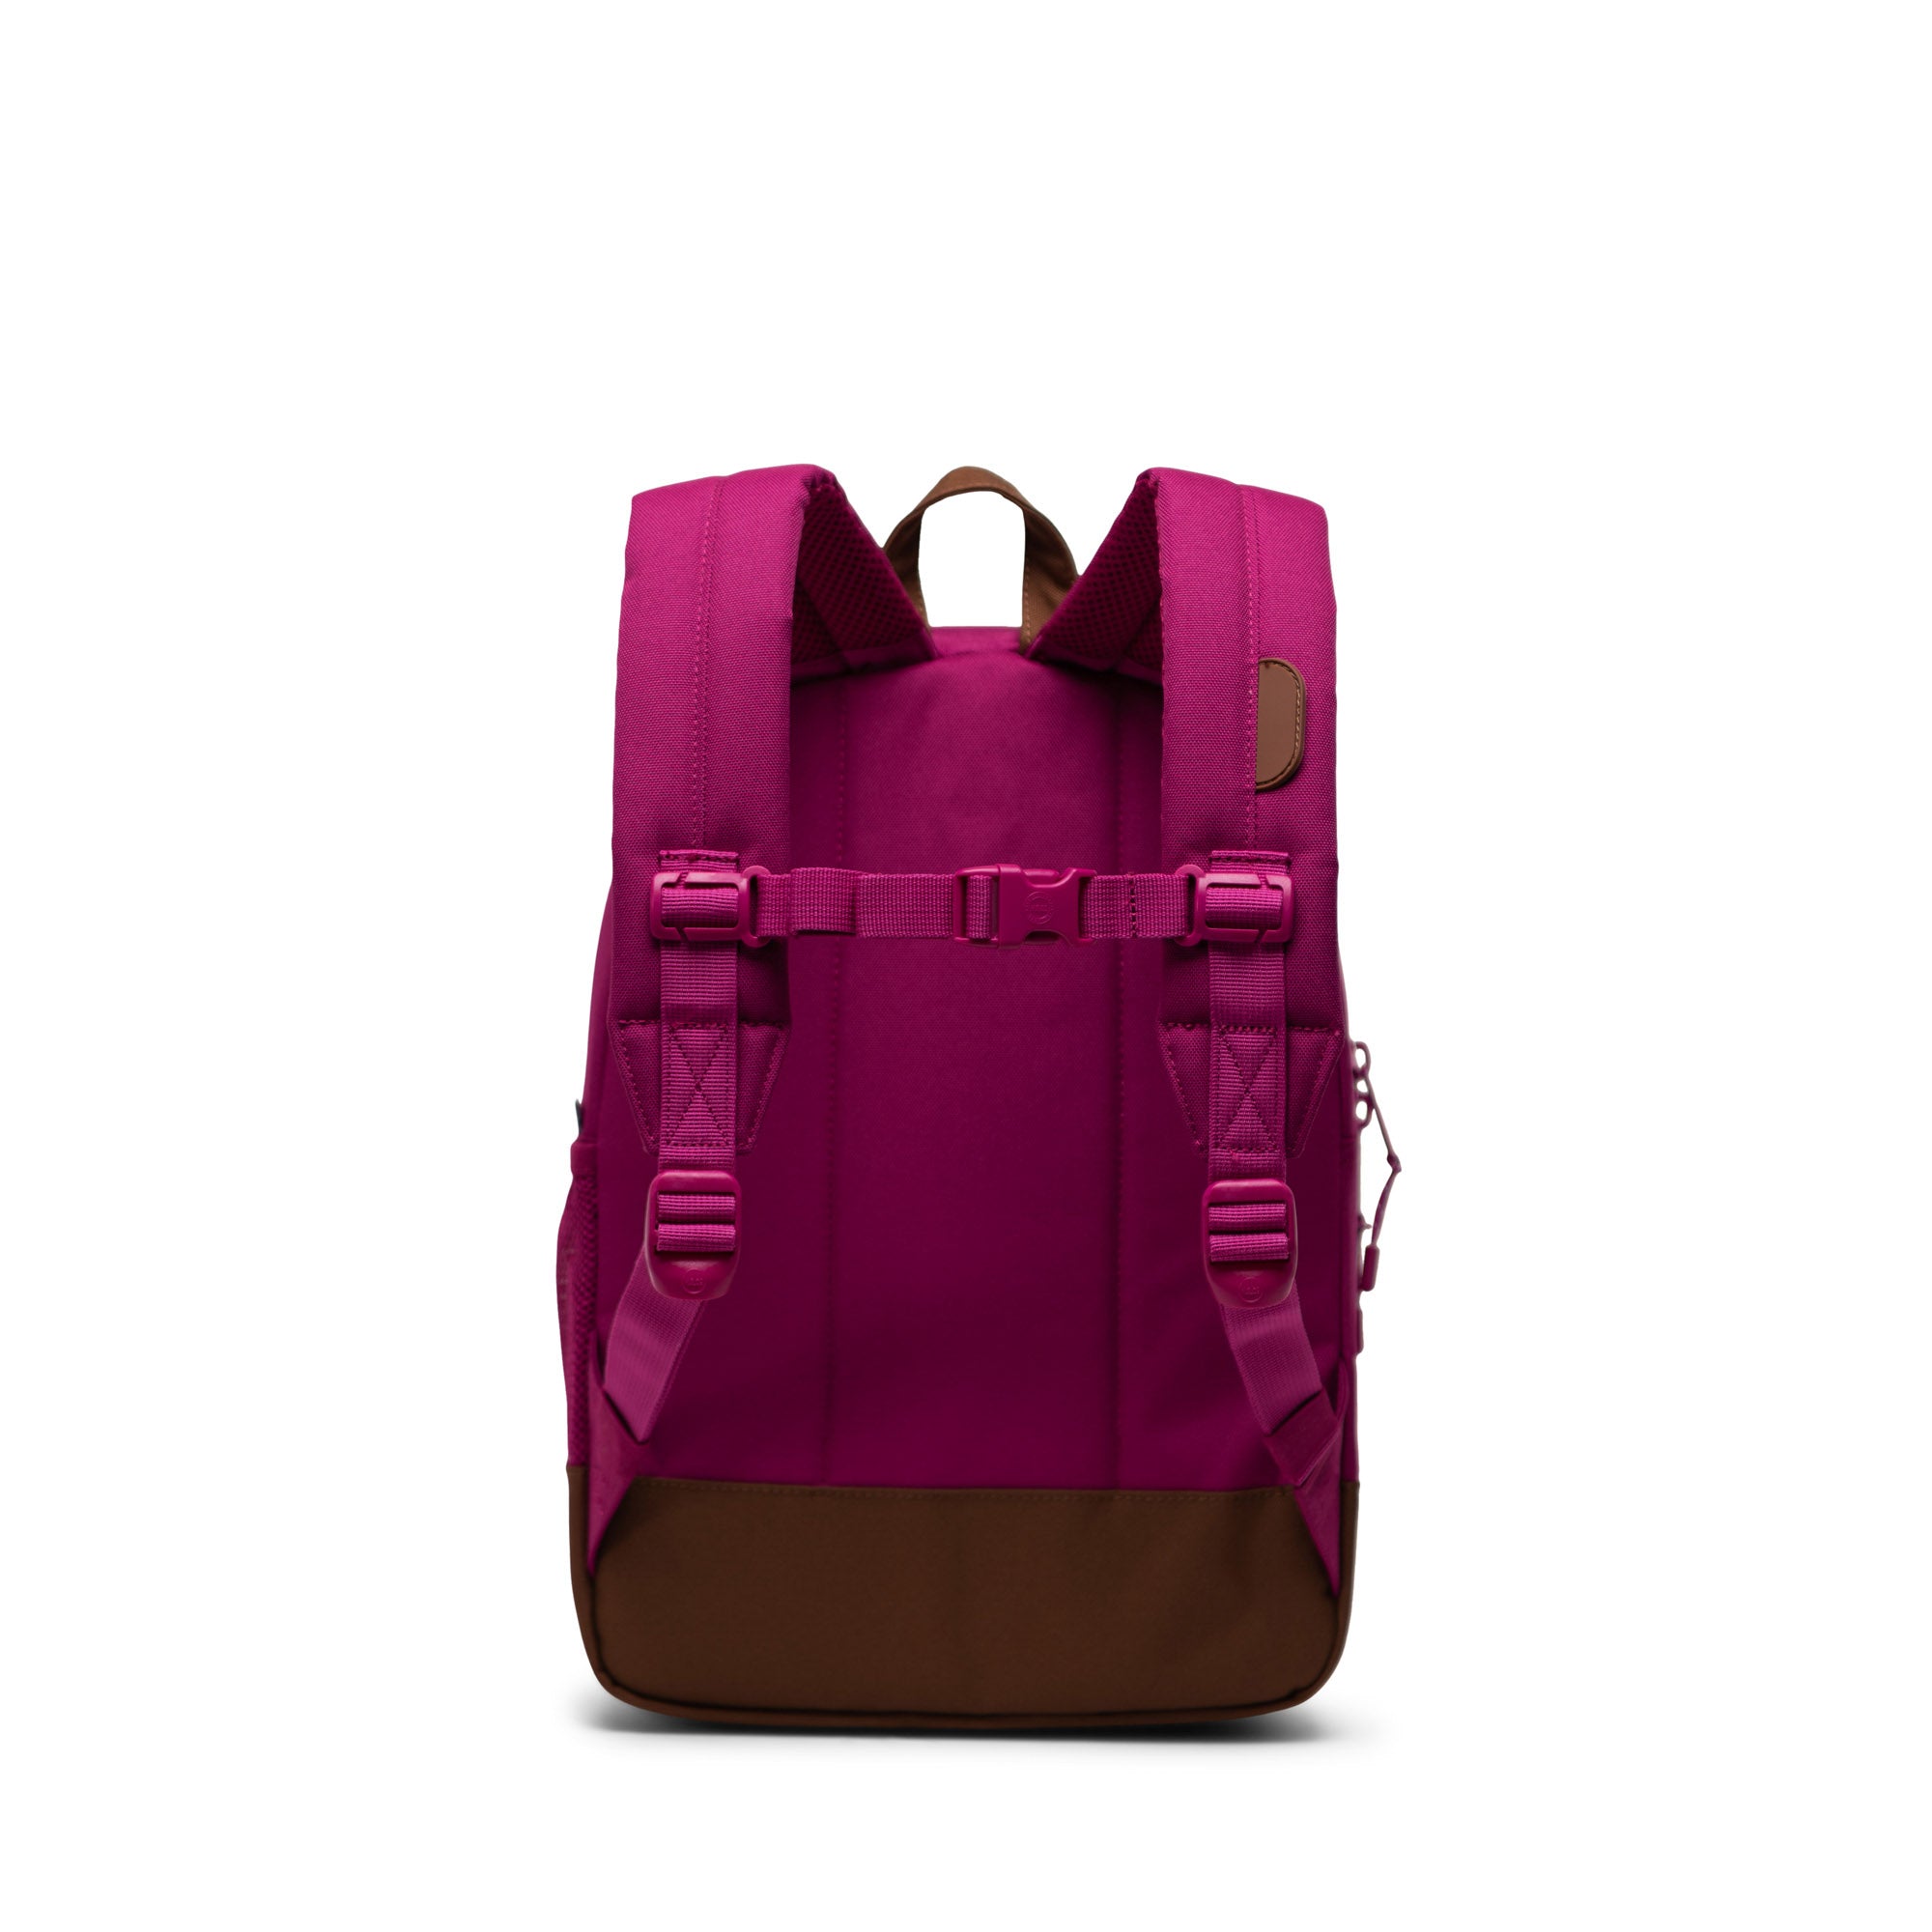 Herschel Supply Co. | Heritage Youth (16 ltr) - Festival Fuchsia & Saddle Brown